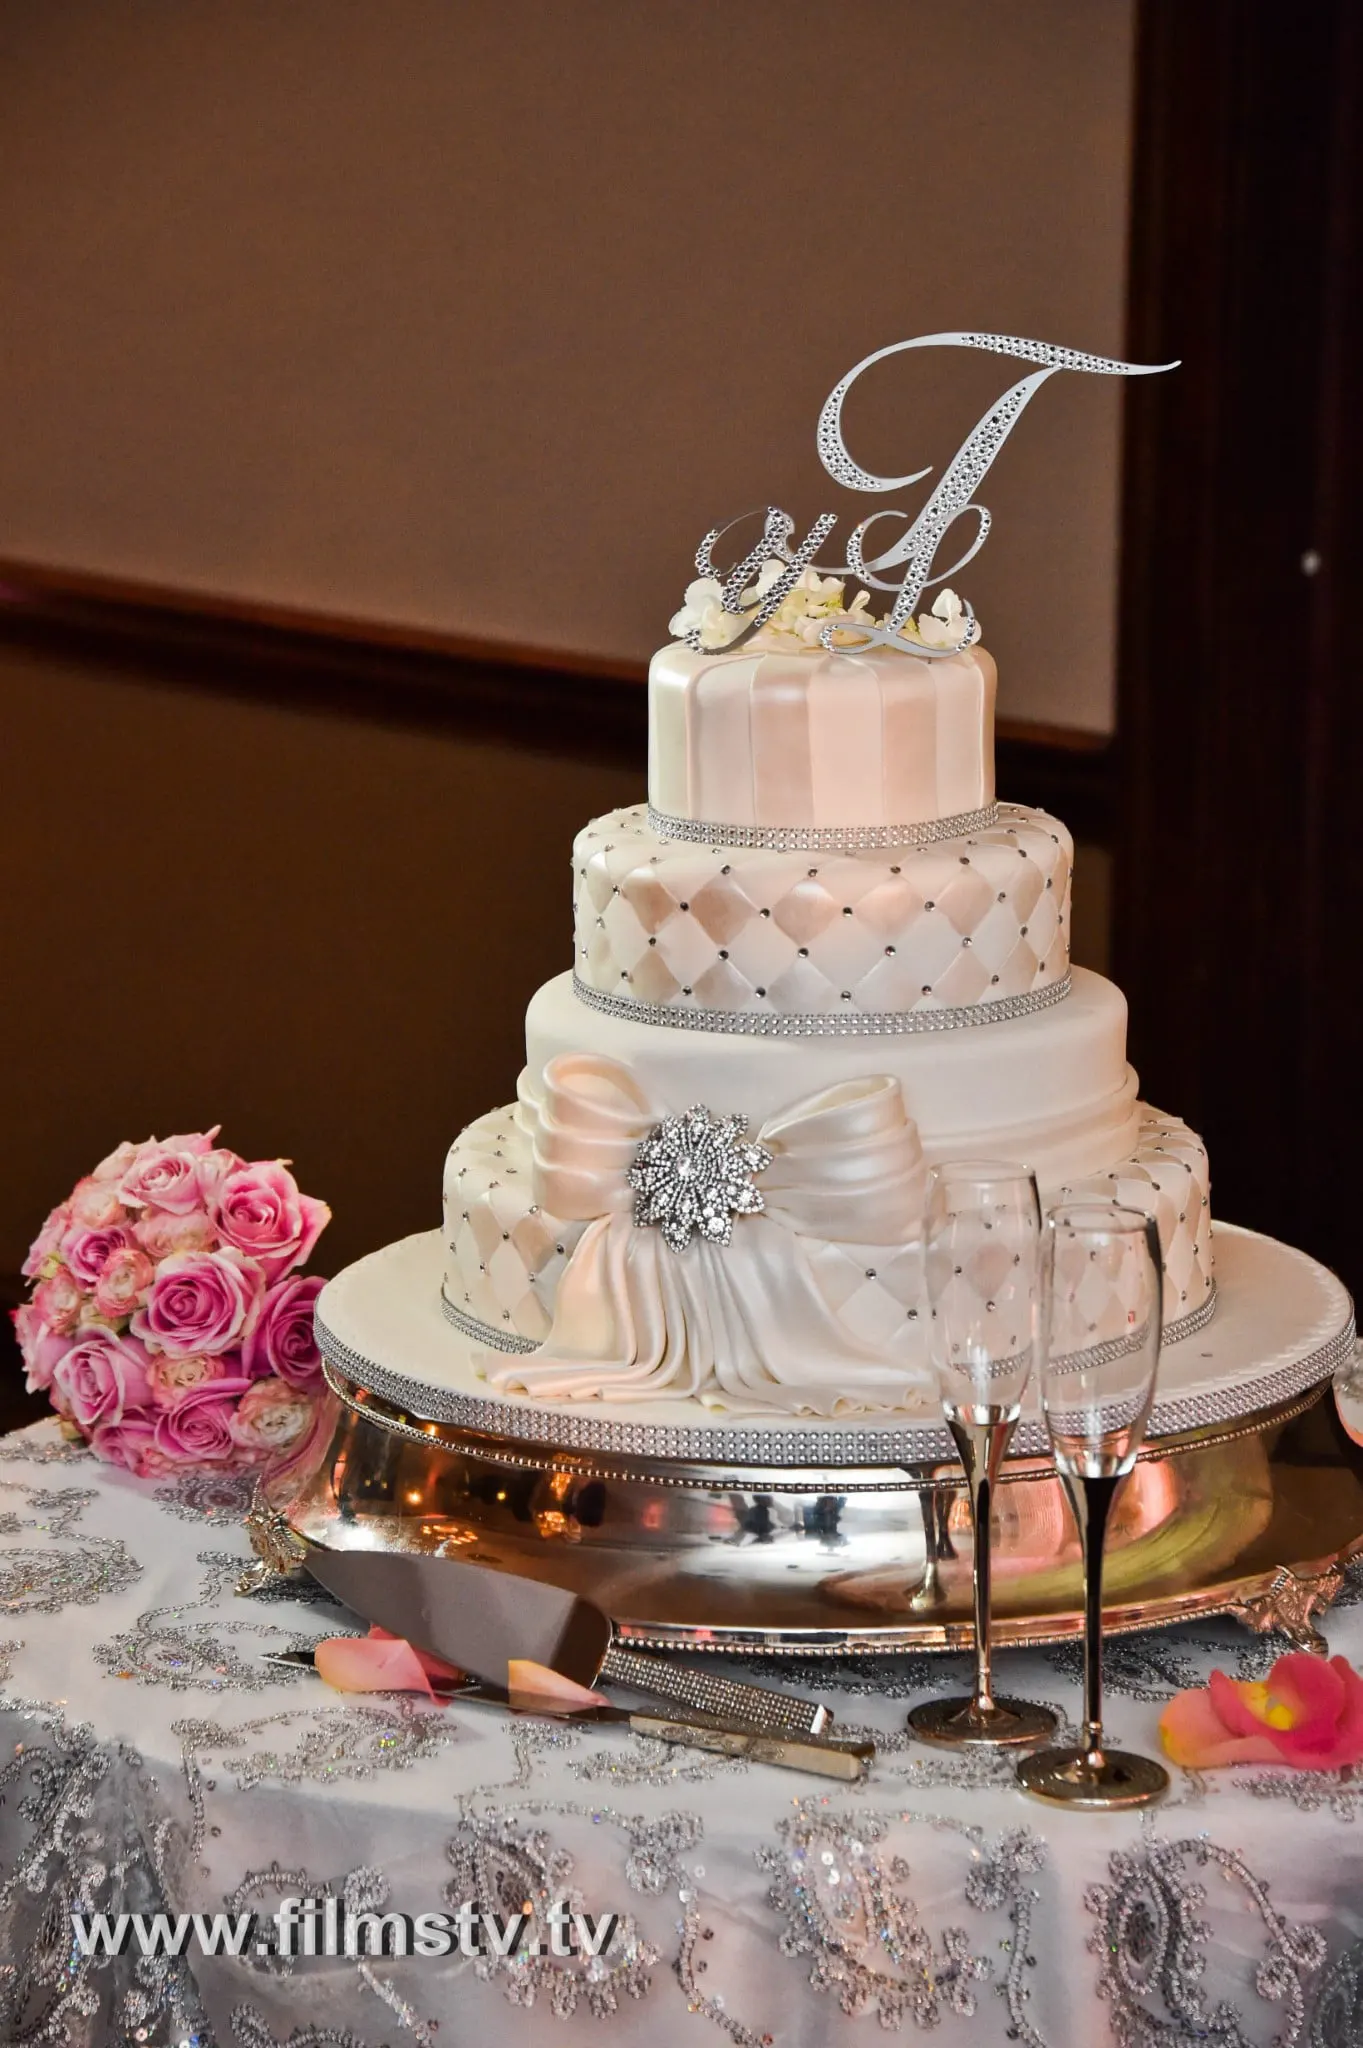 A white wedding cake with a monogram on top.